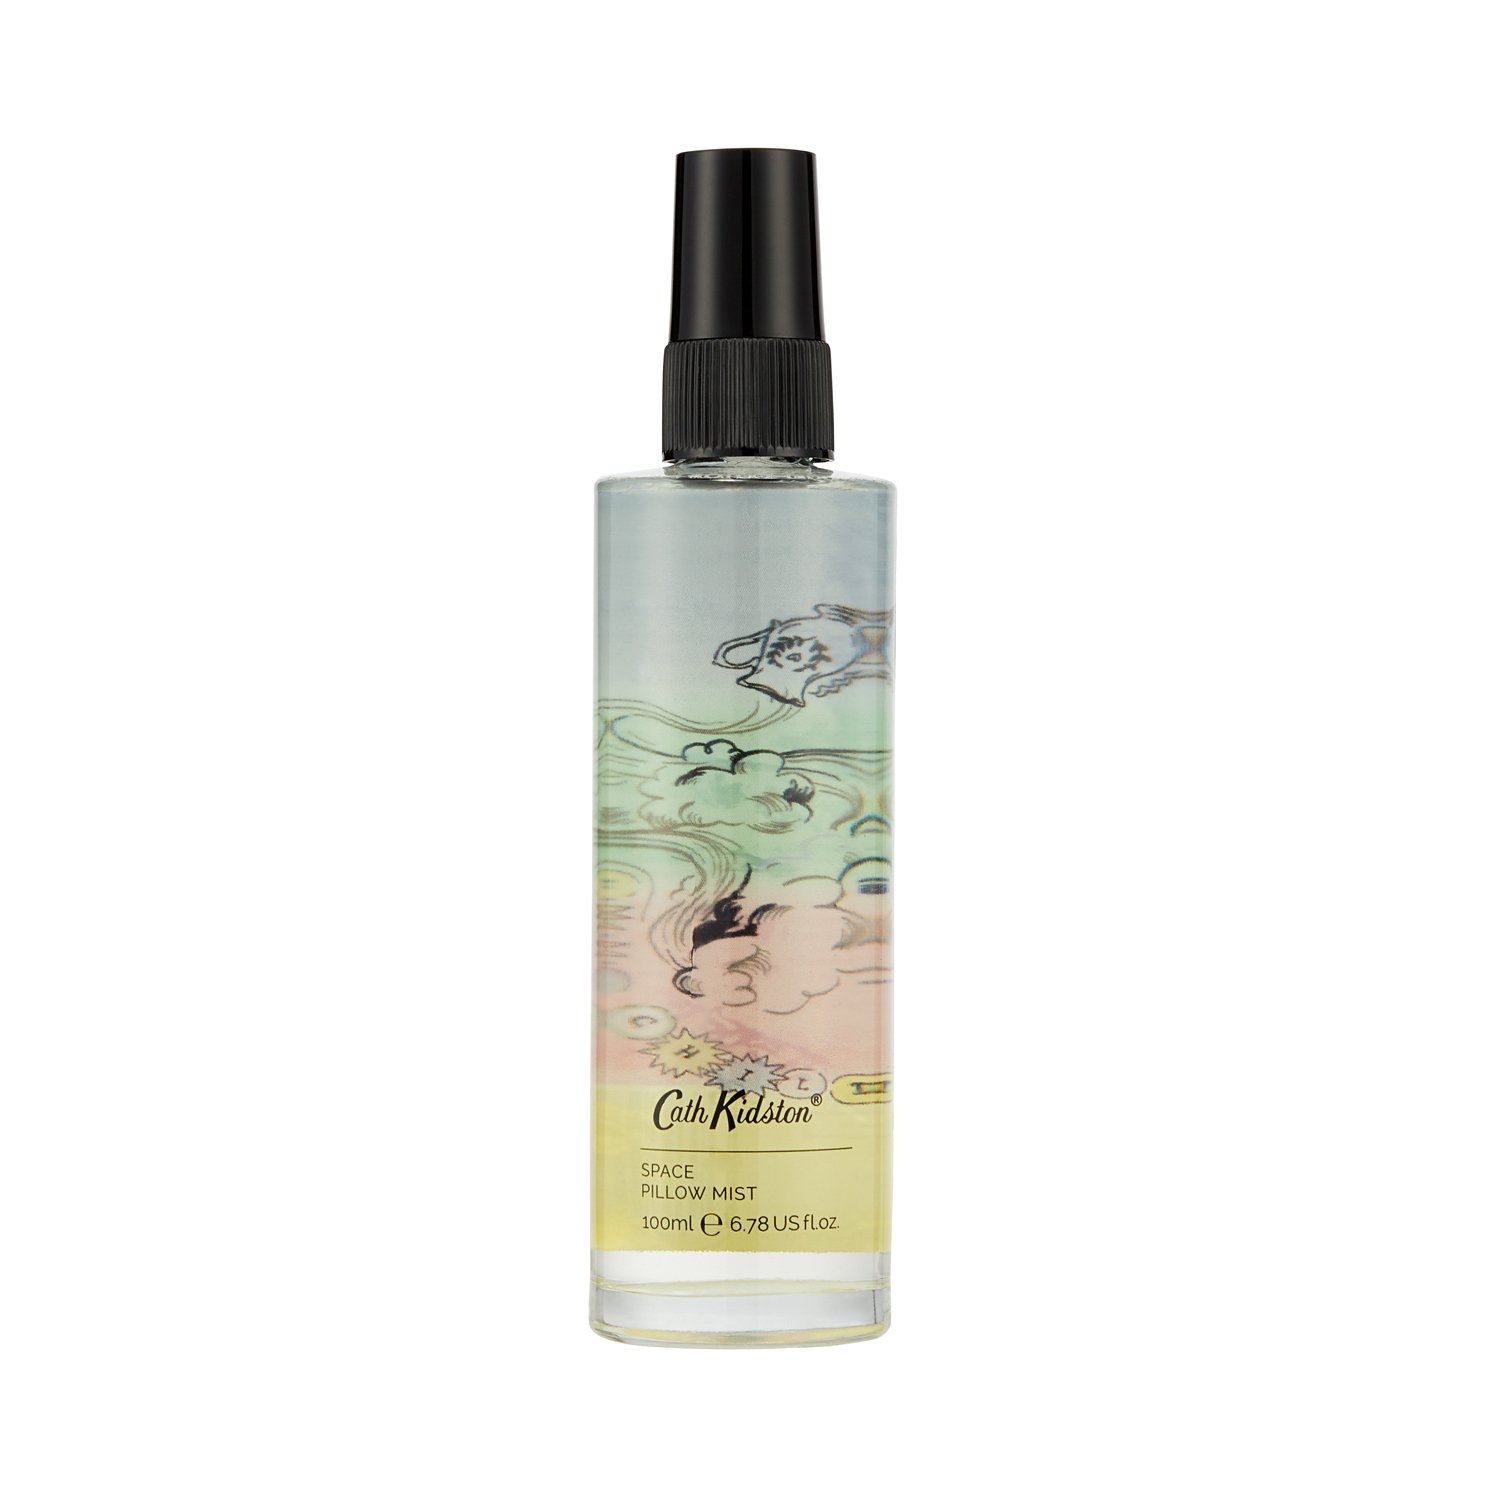 Cath Kidston Power To The Peaceful 100ml Pillow Mist